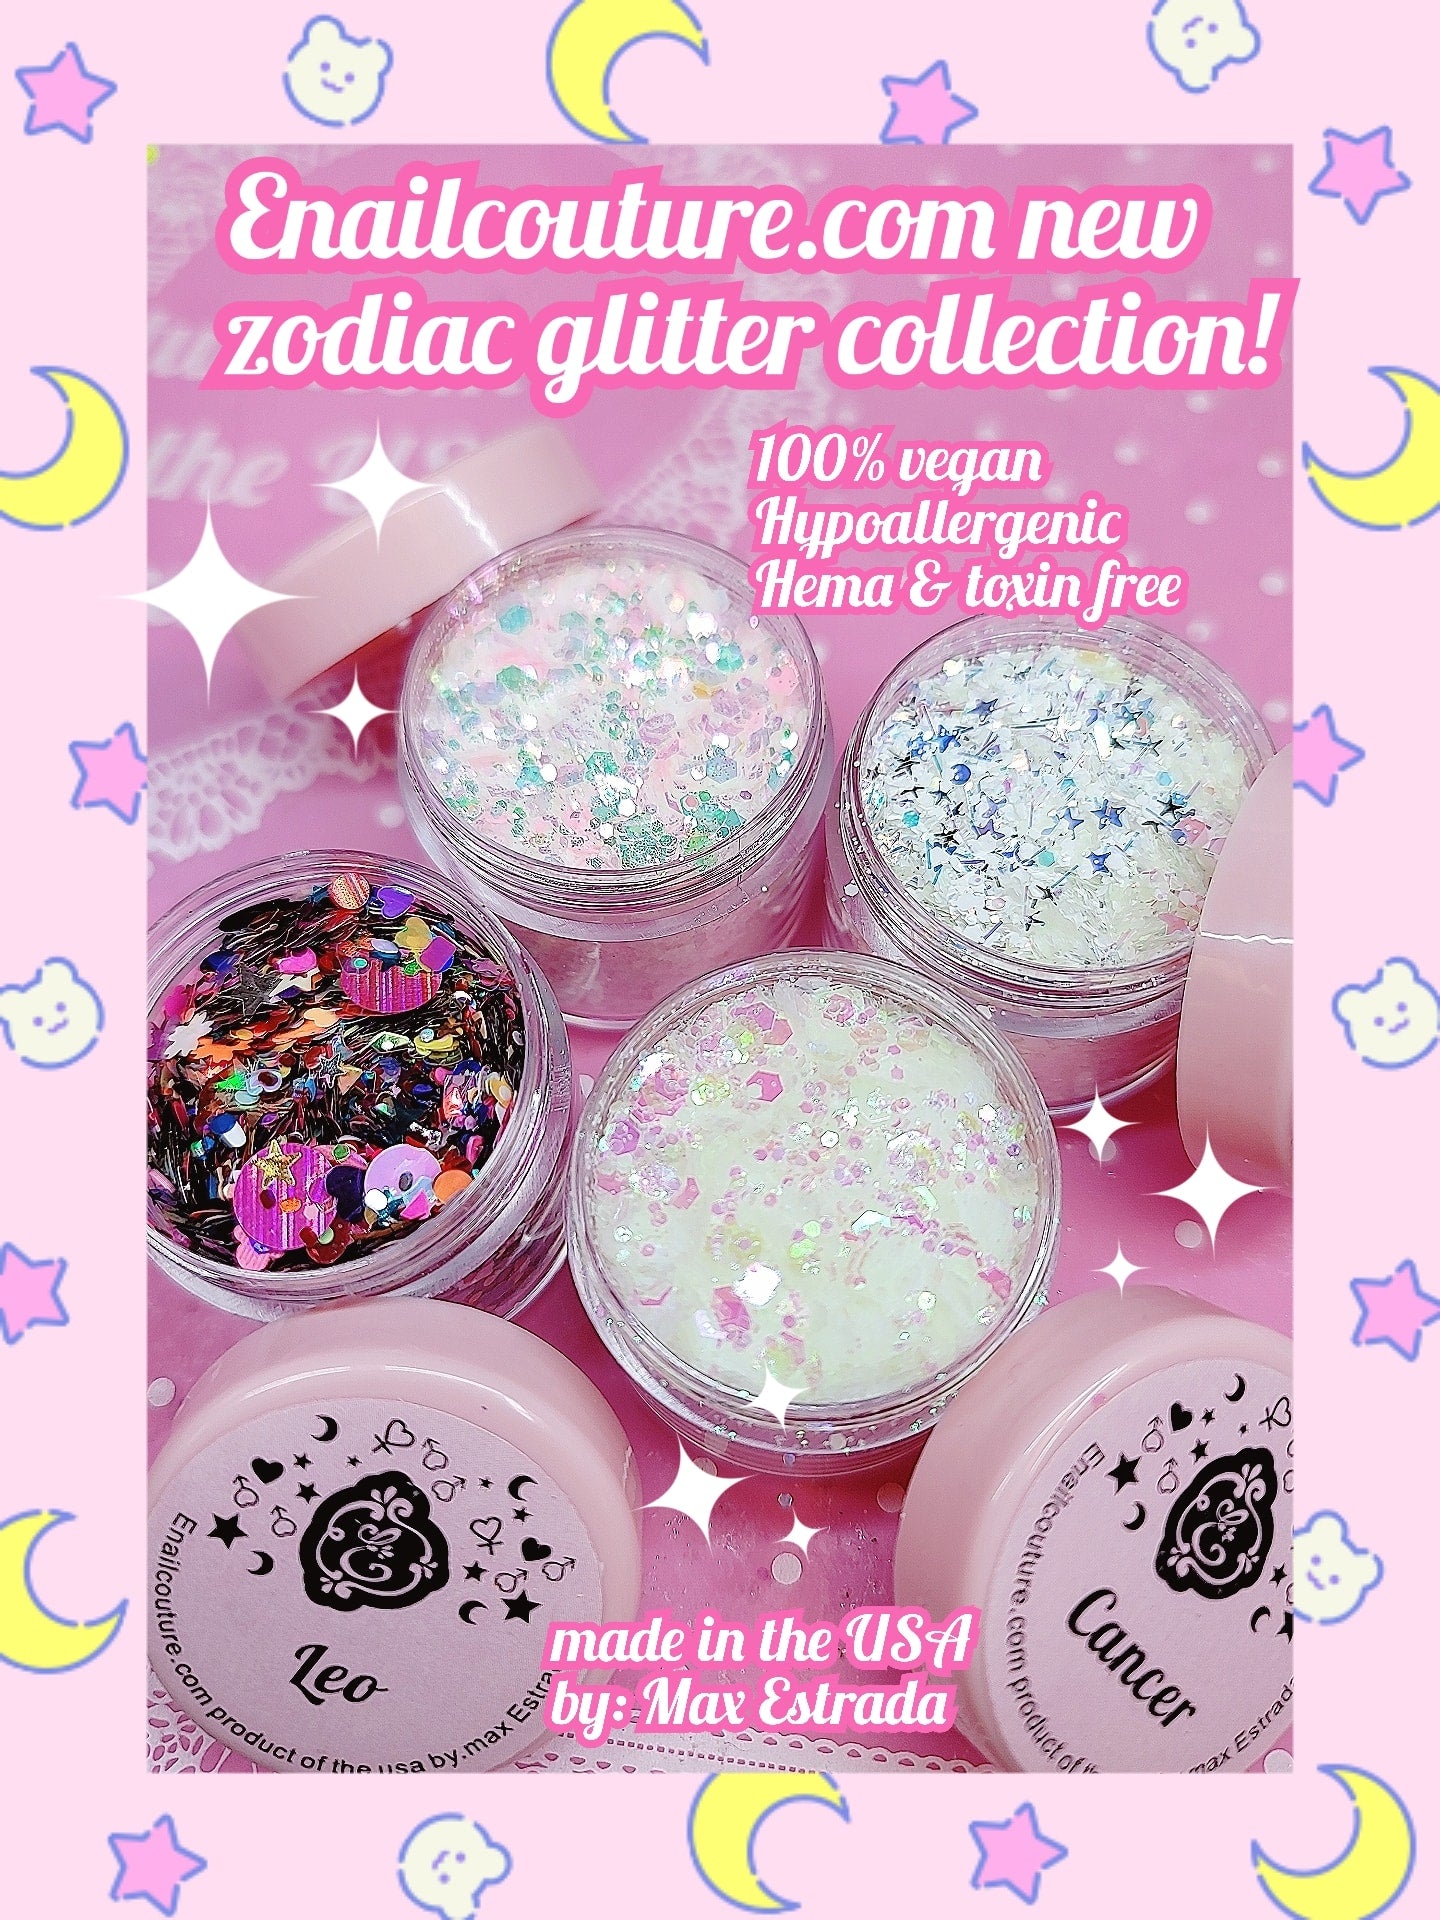 ZODIAC Glitter Series (Holographic Nail Art Glitters Shinning Sugar Effect Nail Powders Laser Candy Color Nail Art Supplies Flakes Dipping Dust Colorful Nail Decor Glitter Sequins Designs Manicure Tips Accessories )